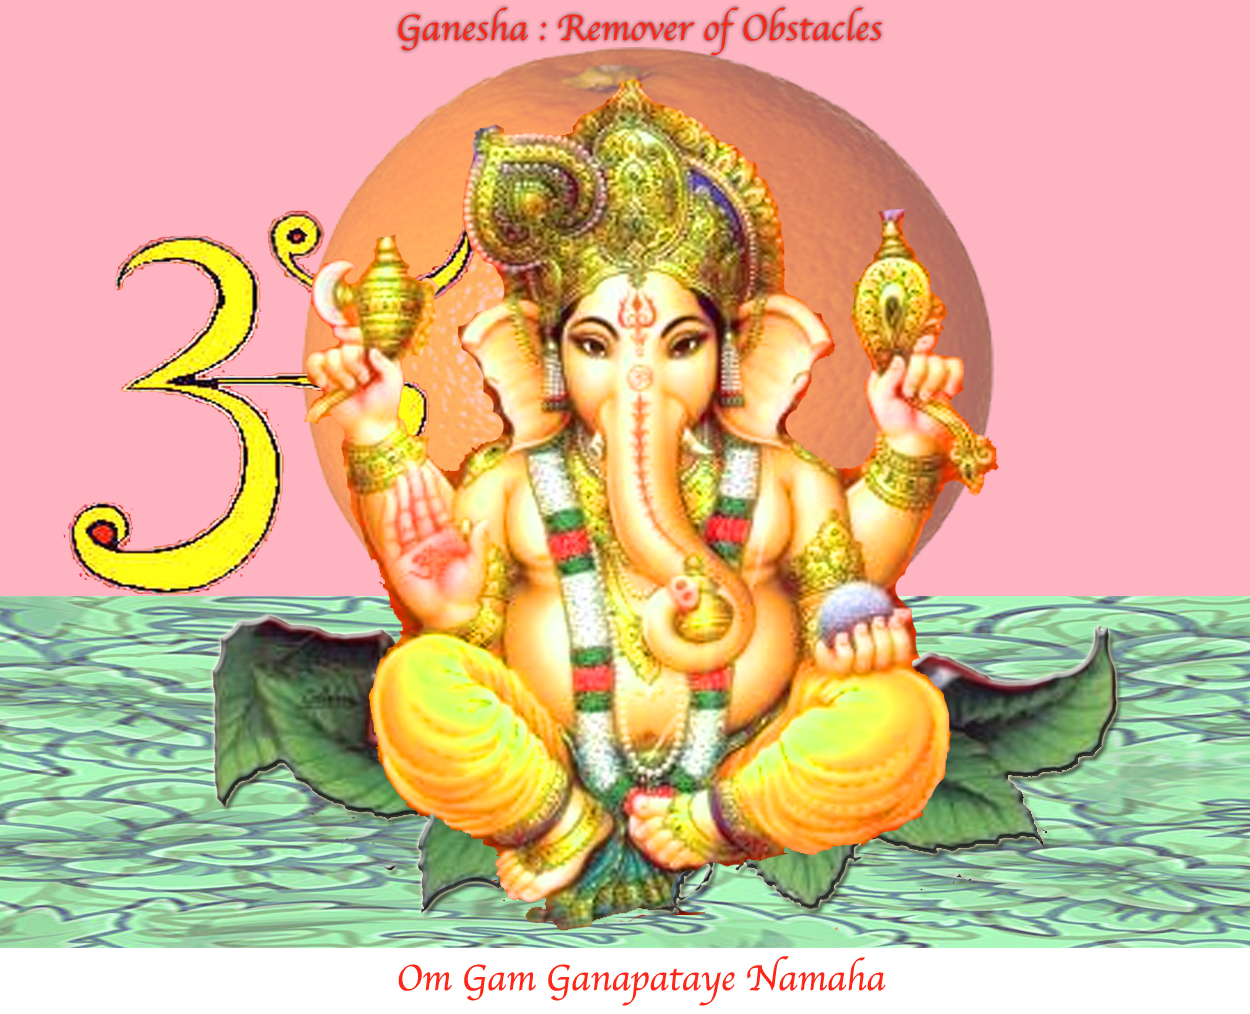 Ganesha Remover of Obstacles